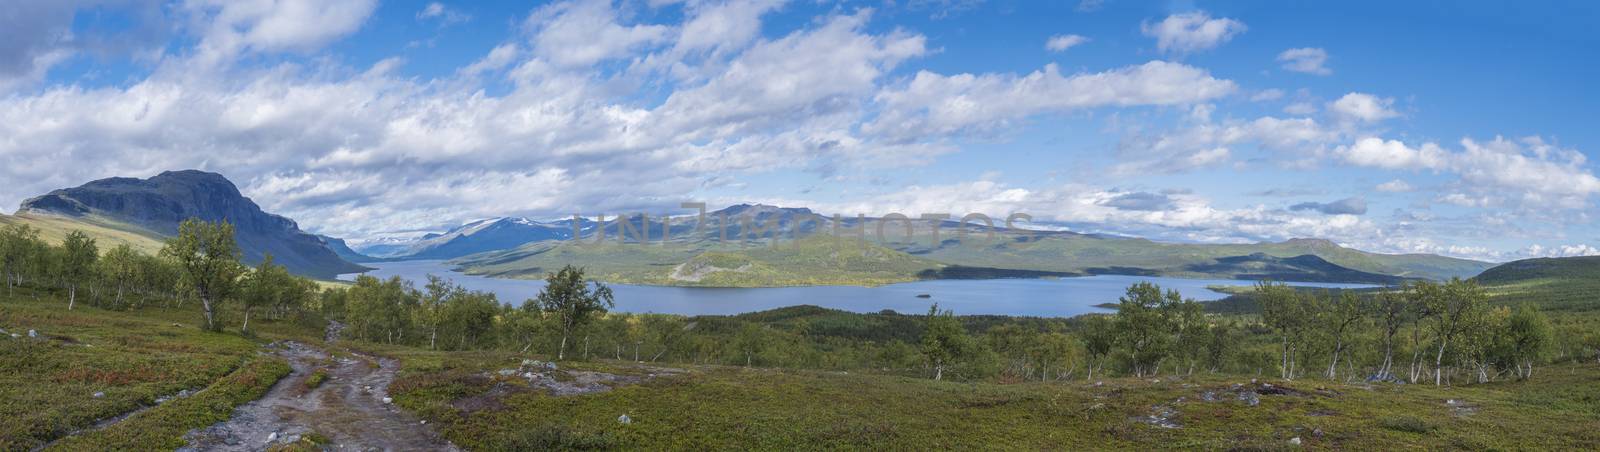 Panoramic landscape with beautiful river Lulealven, snow capped mountain, birch tree and footpath of Kungsleden hiking trail near Saltoluokta, north of Sweden, Lapland wild nature. Summer blue sky by Henkeova